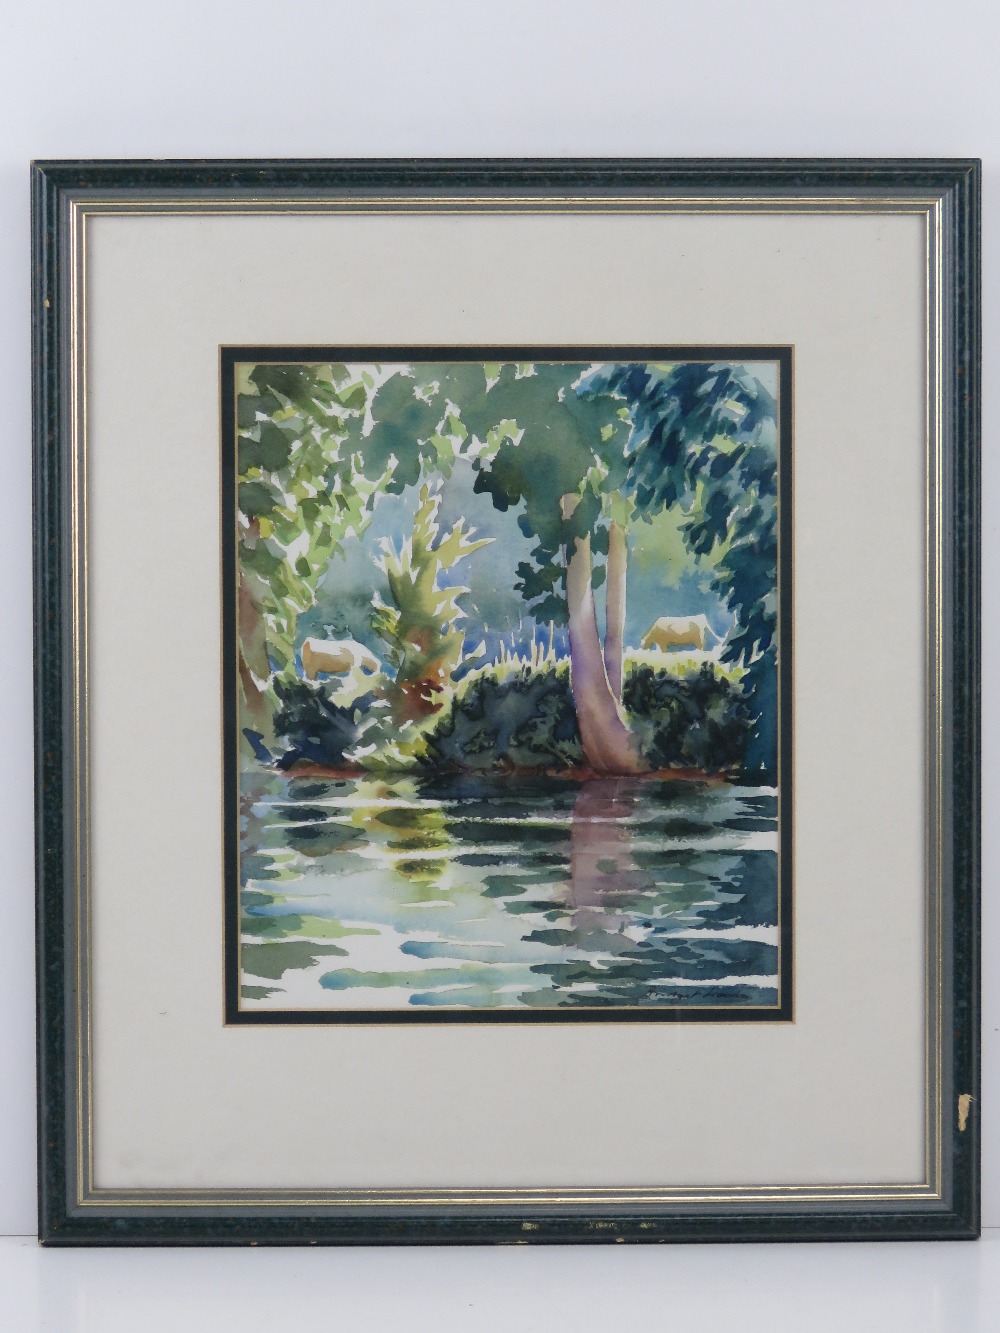 Bridget Woods, watercolour 'Jonquil' river with trees and cattle beyond, 25 x 21cm, framed and